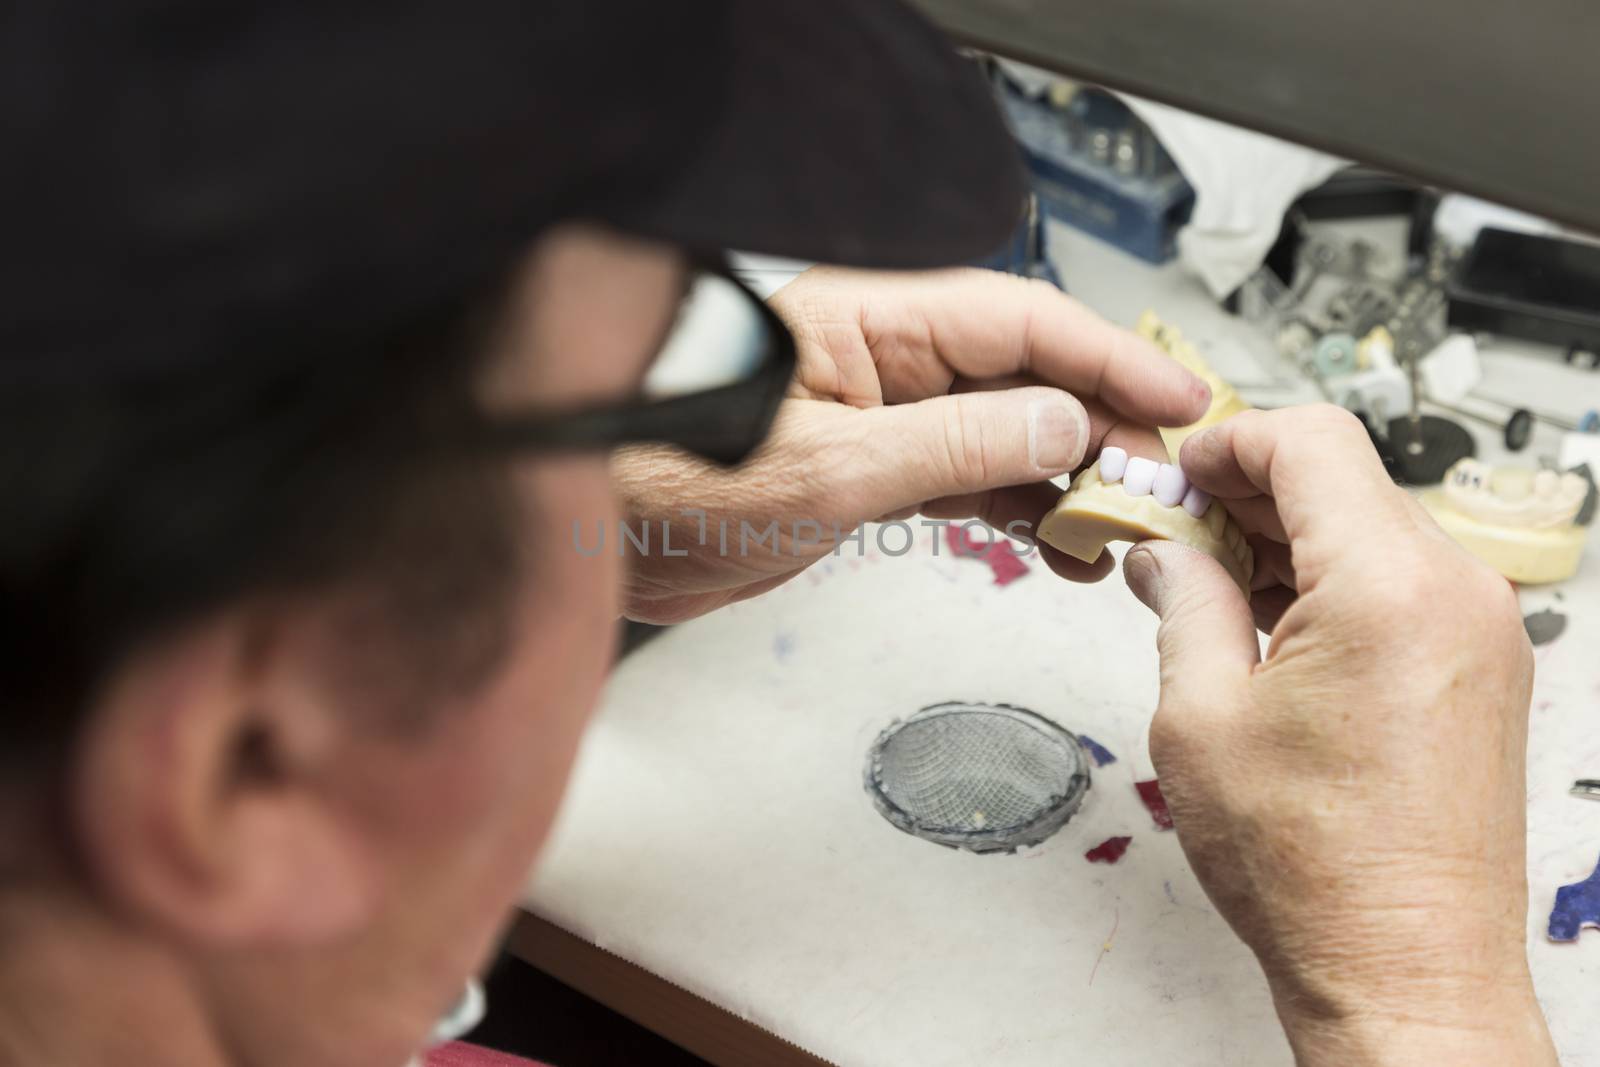 Dental Technician Working On 3D Printed Mold For Tooth Implants by Feverpitched